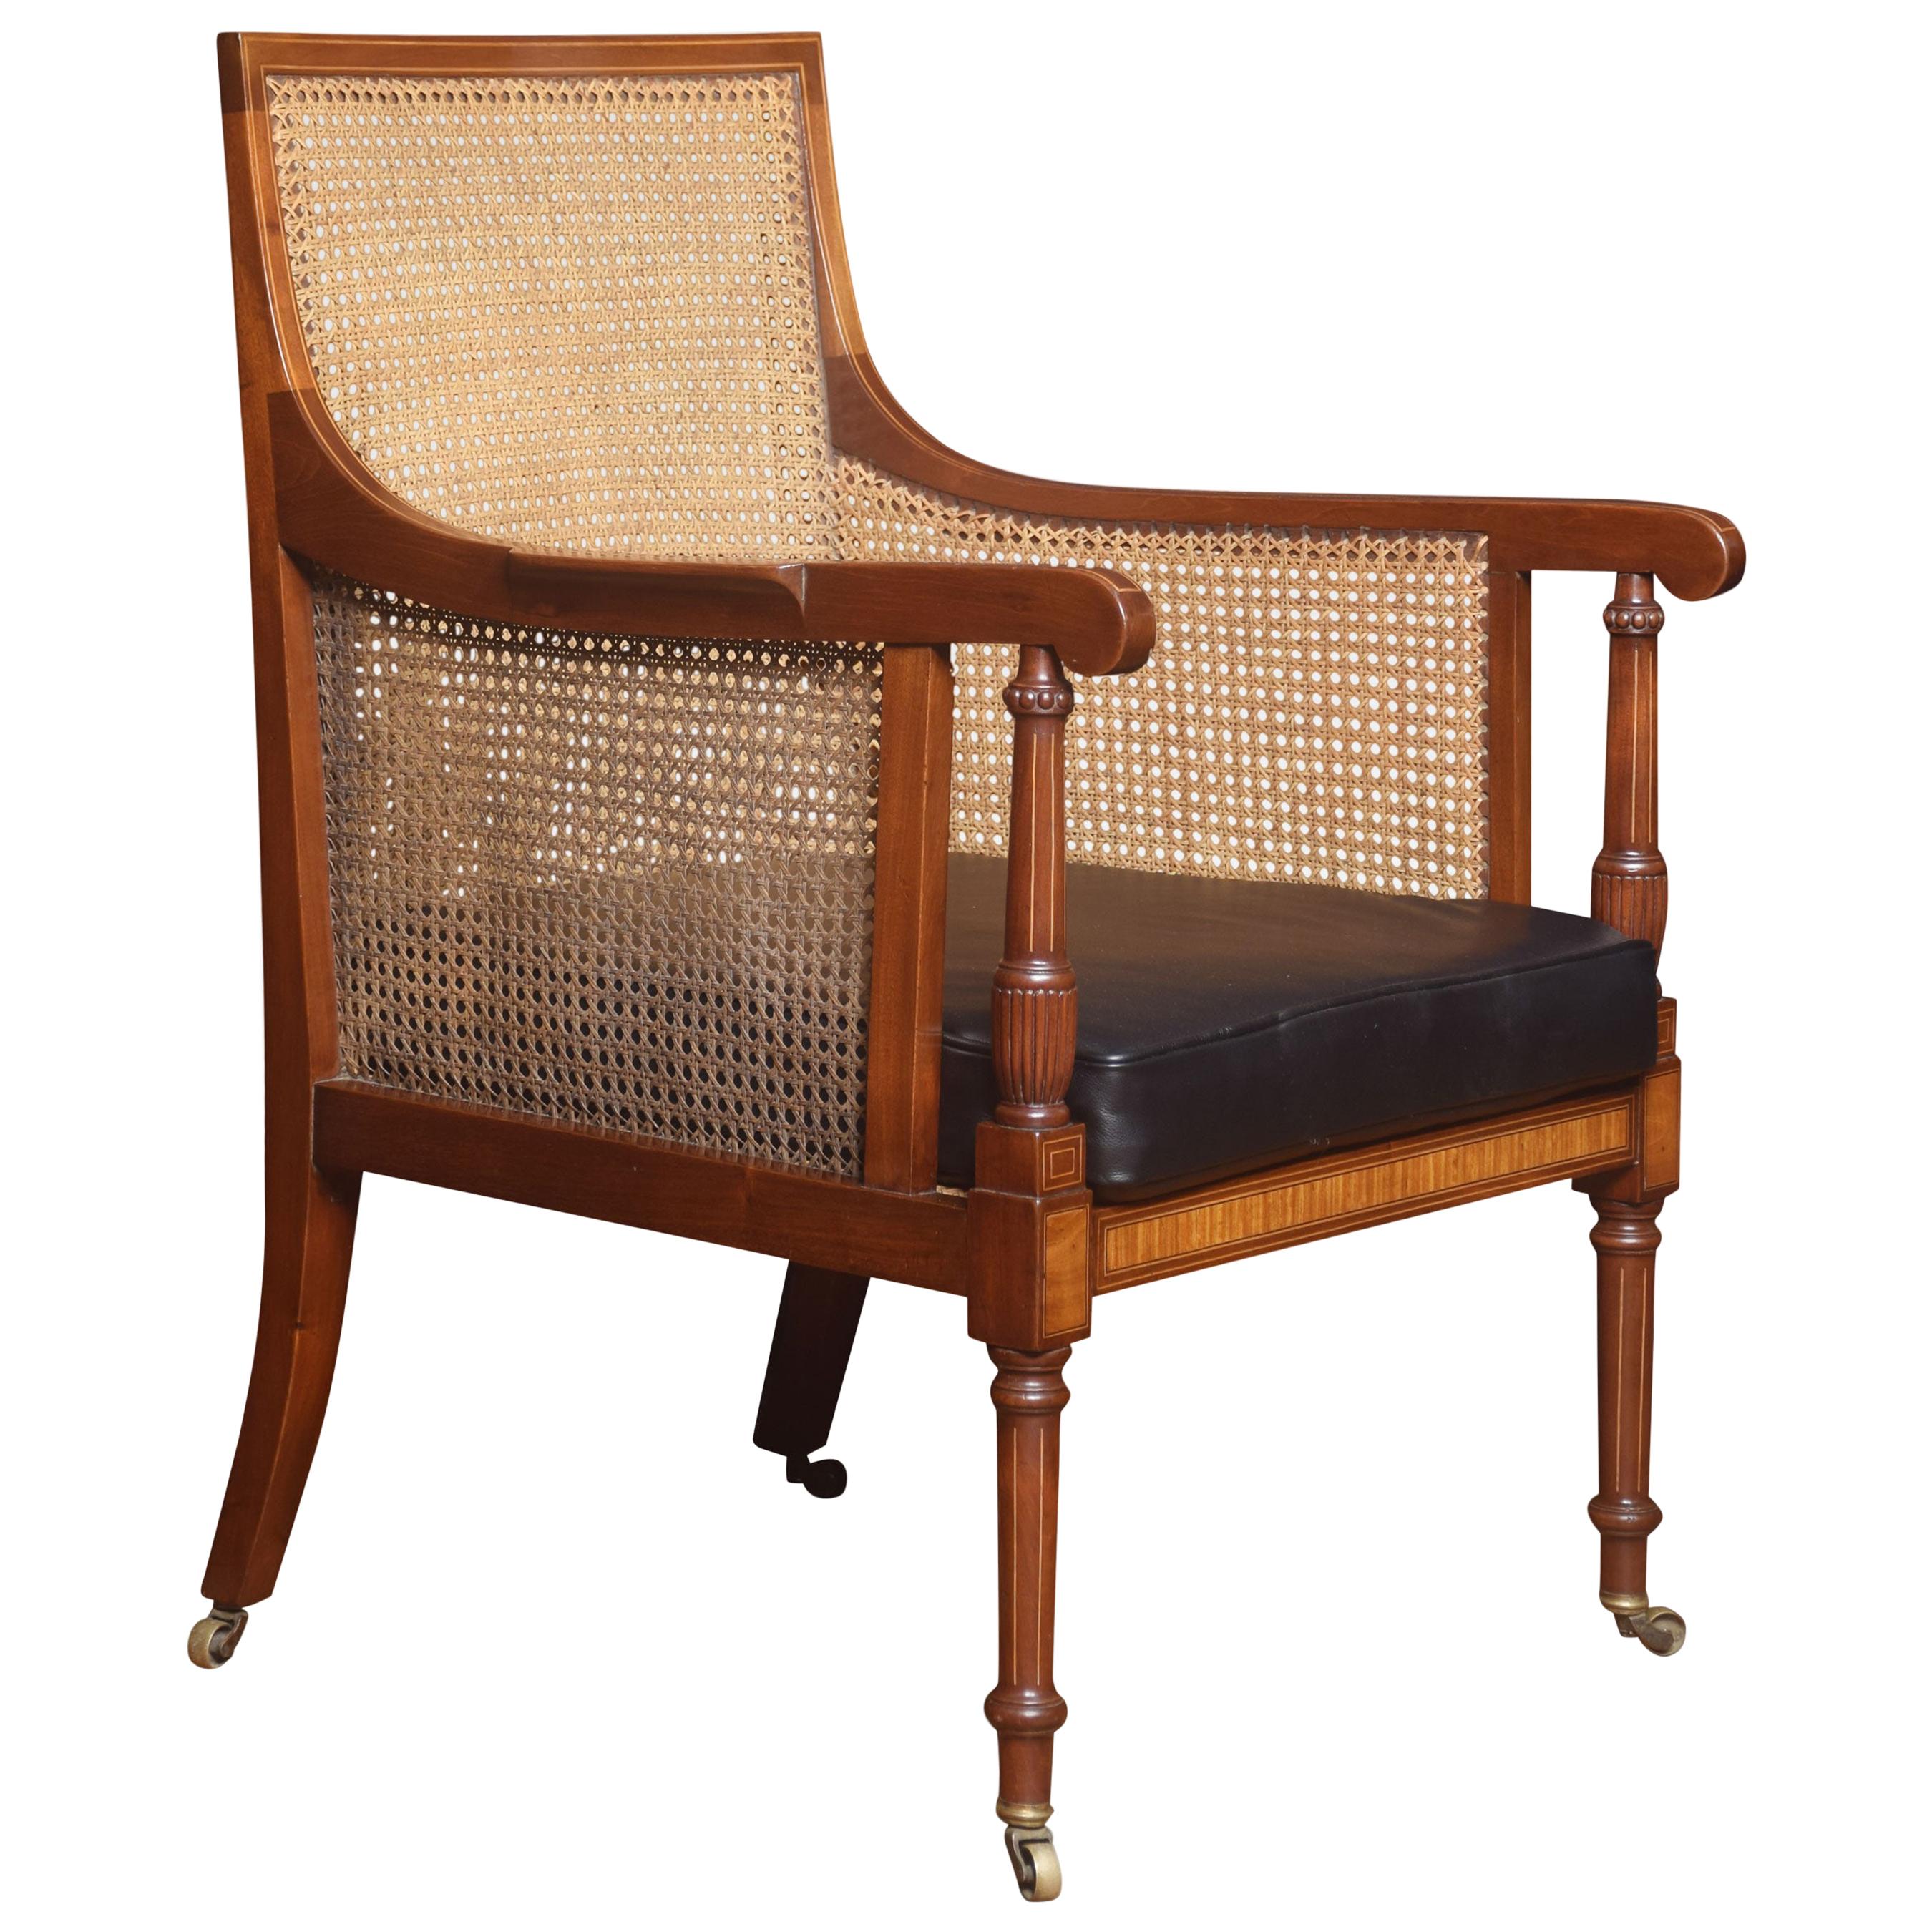 Mahogany and Satinwood Inlaid Bergère Armchair